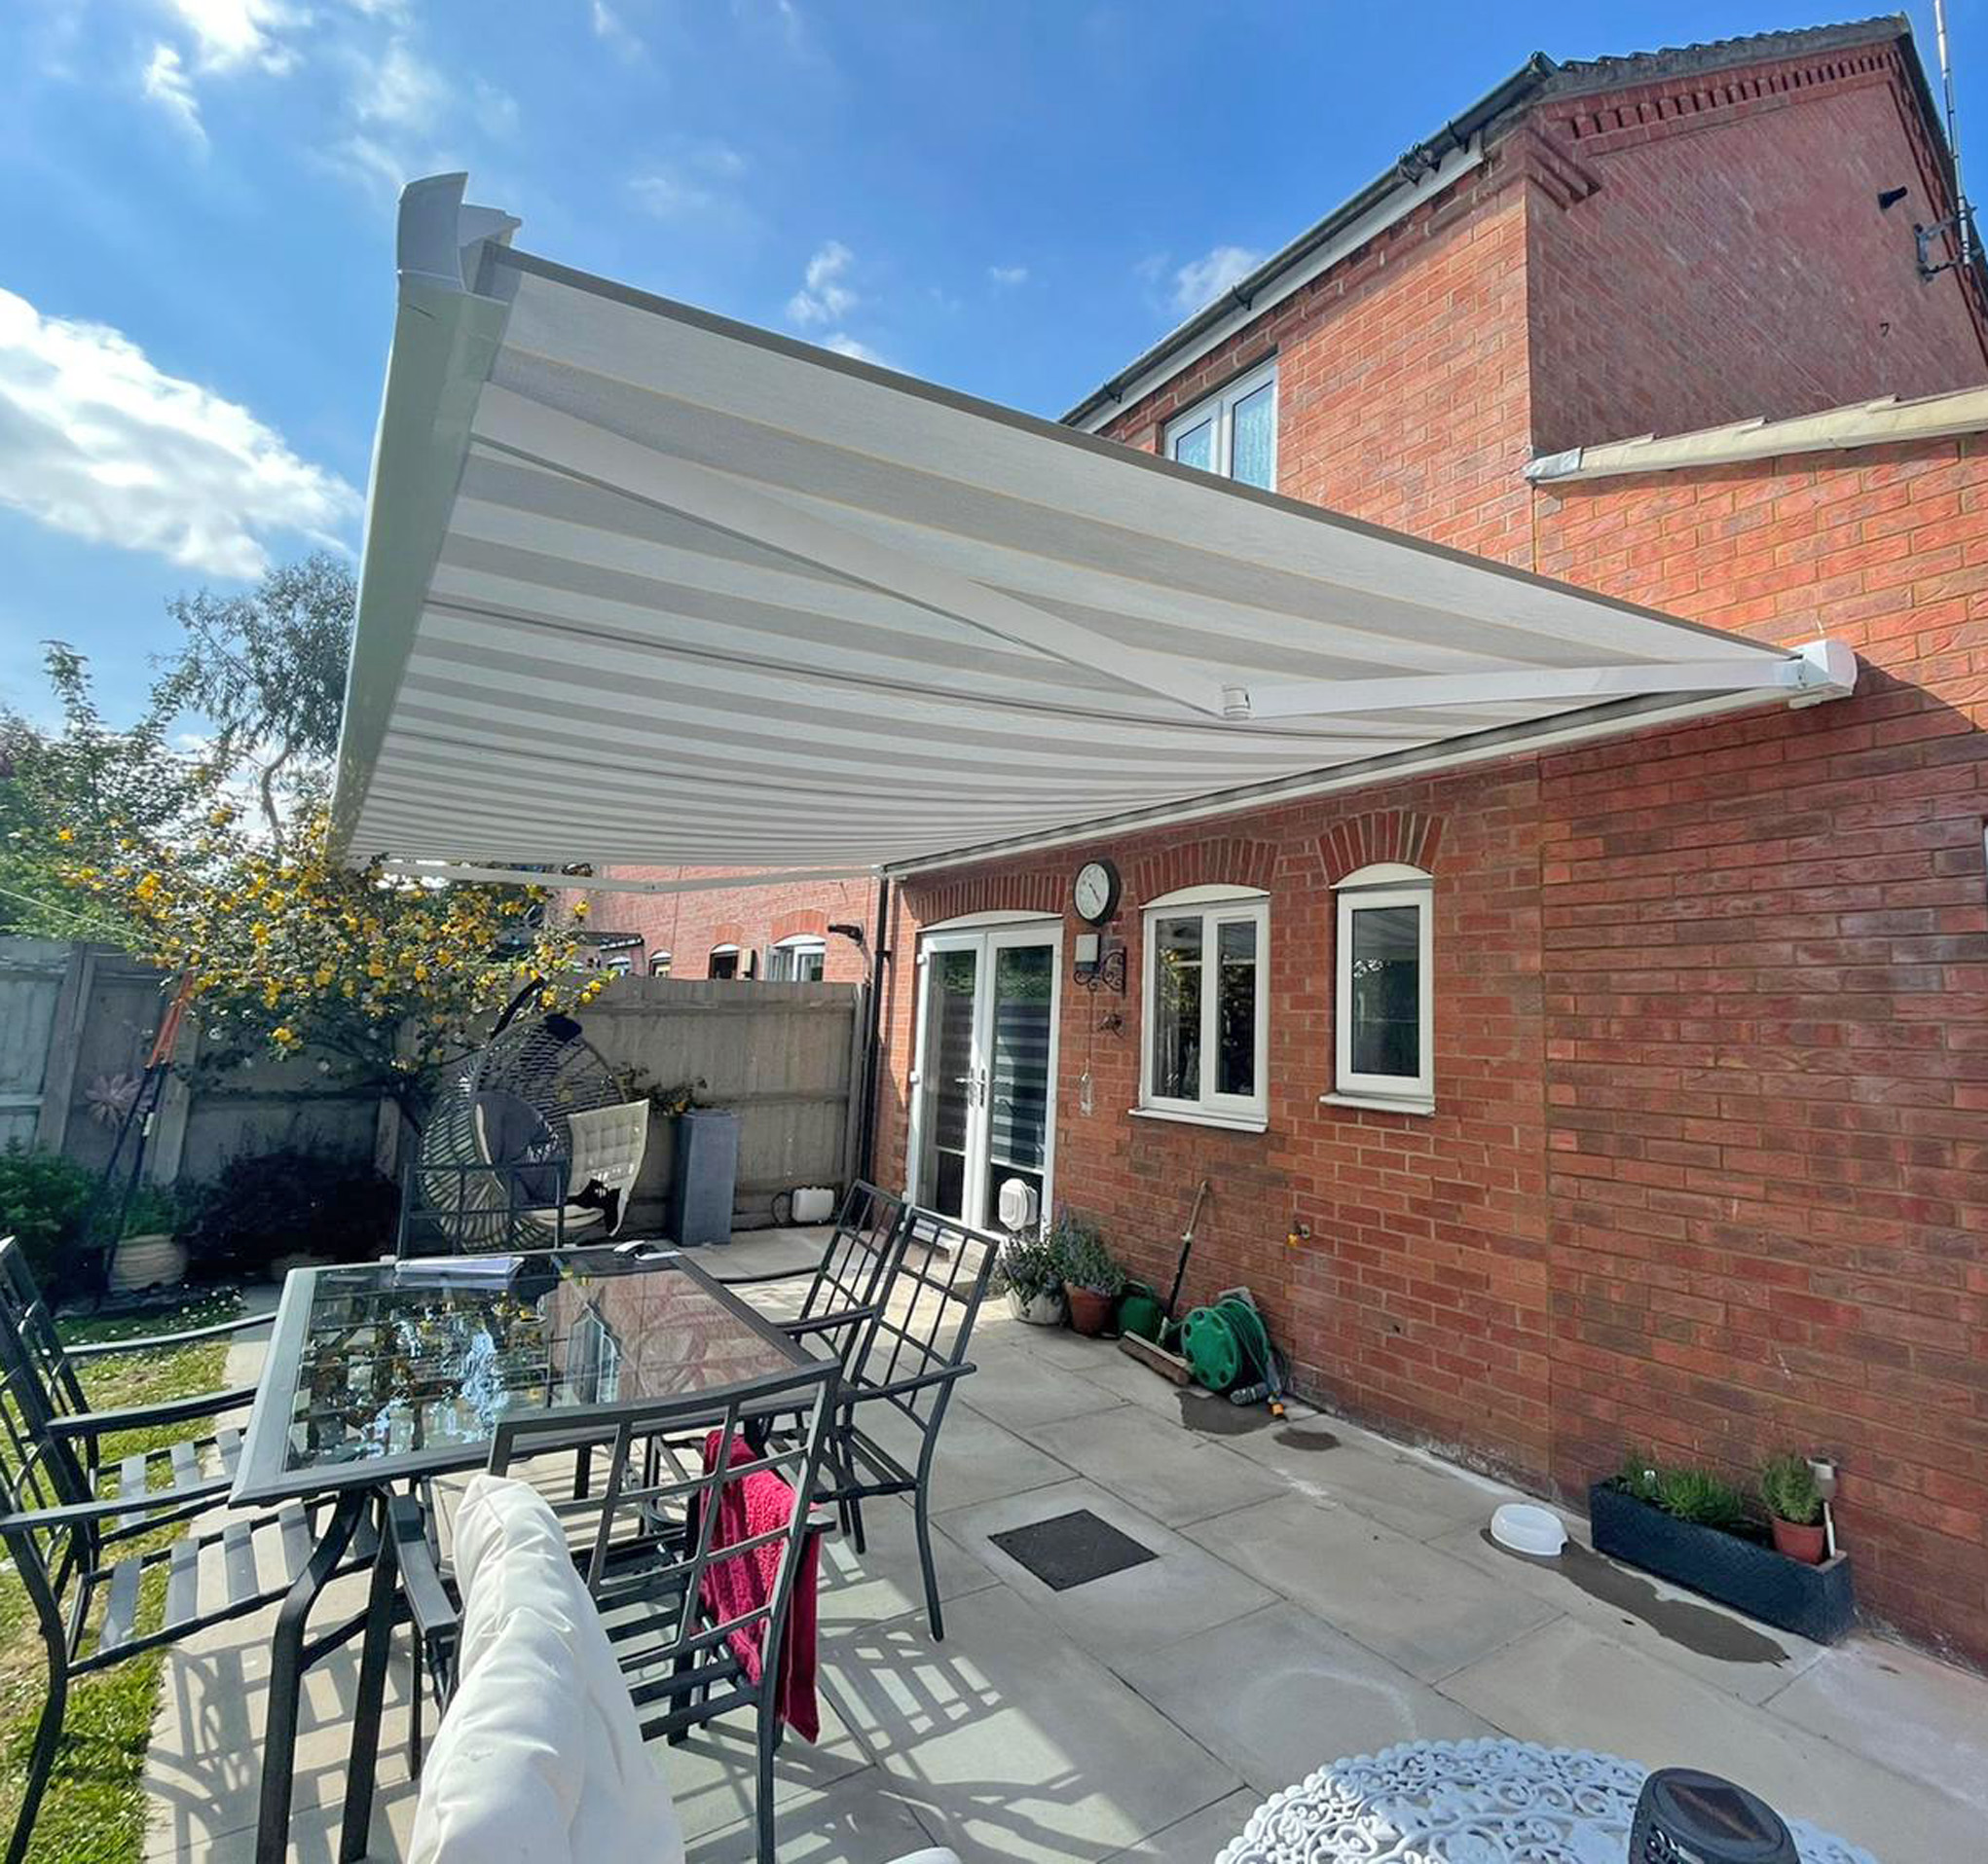 Birkdale 5m x 2.5m Green Fabric & White Frame With Remote Control Kiara Electric Awning